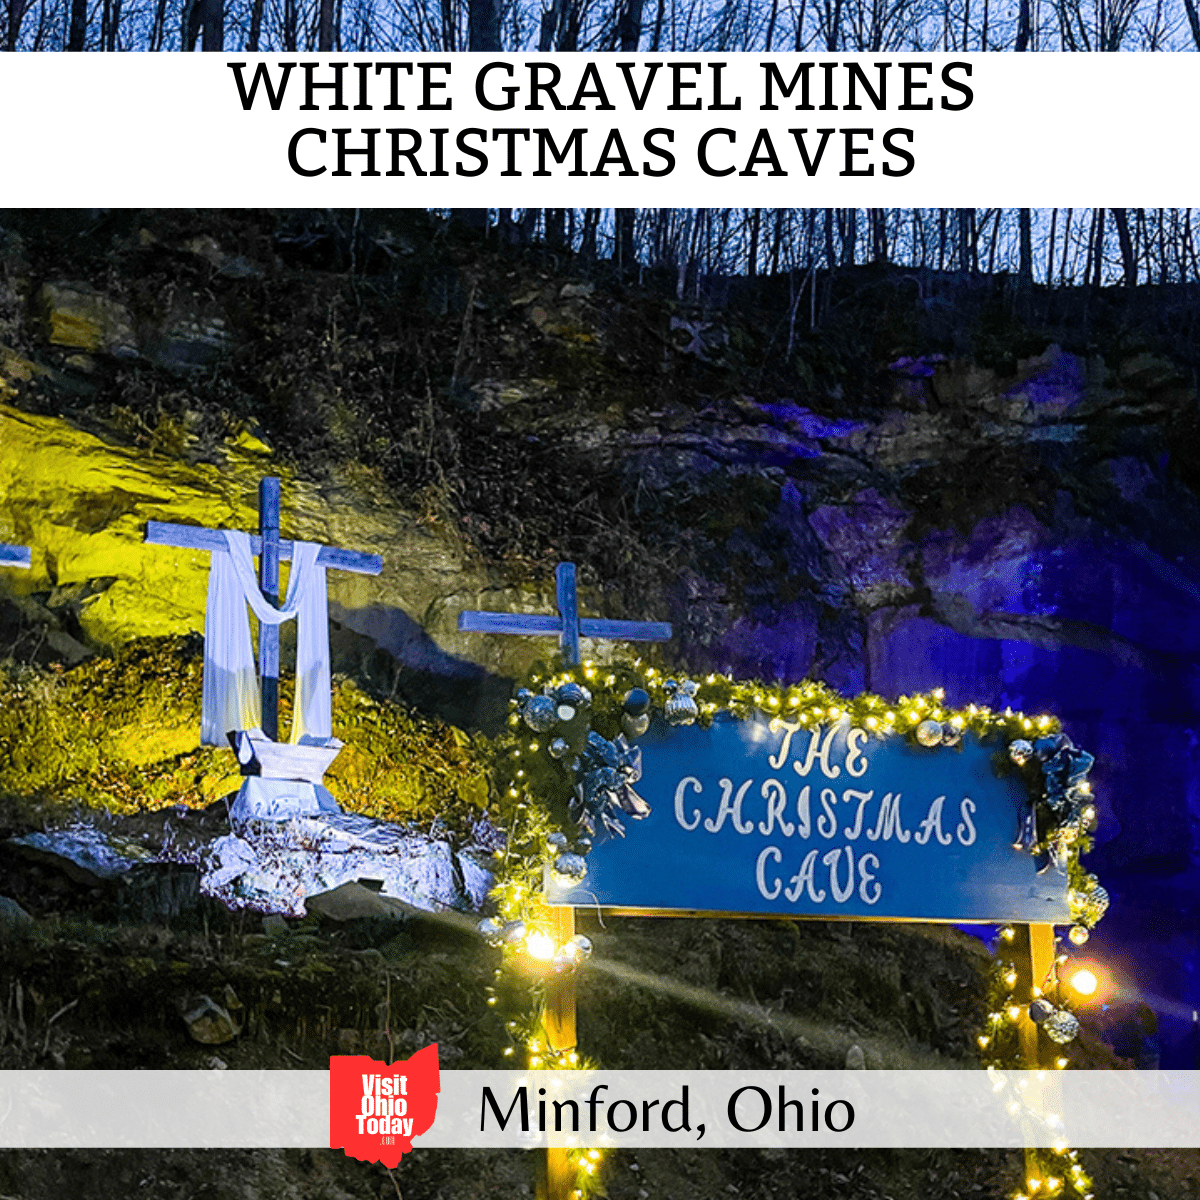 square image with a photo of the entrance sign at the White Gravel Mines Christmas Caves